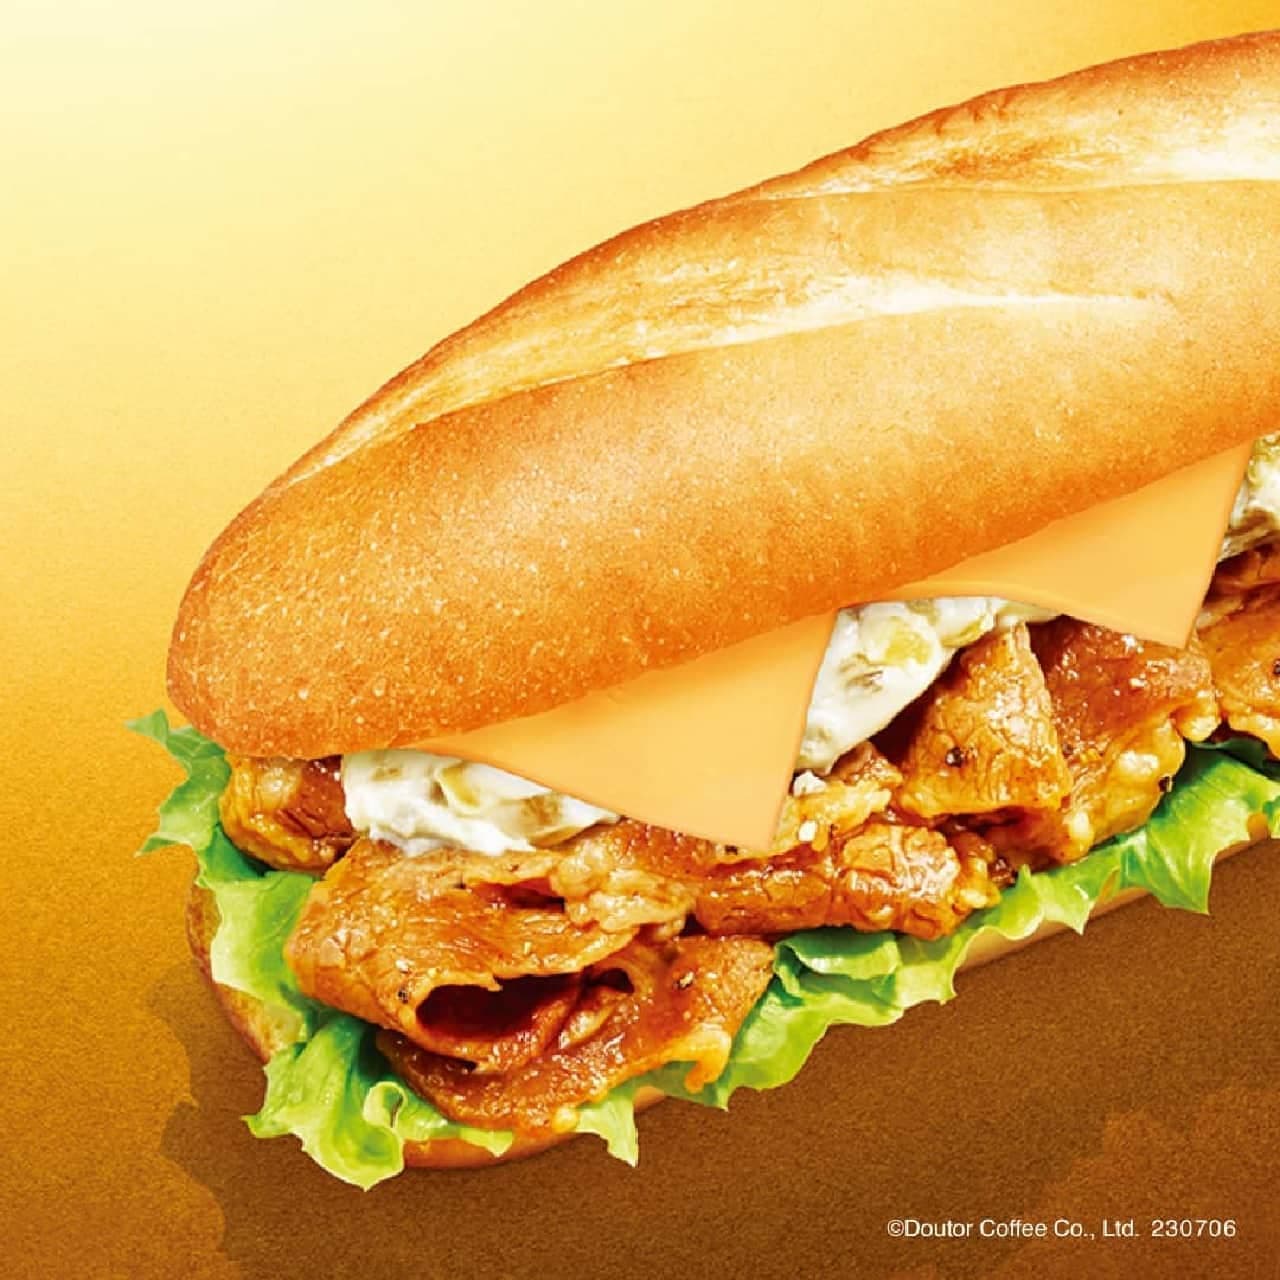 Doutor "Limited Time Offer Milano Sandwich Cheese in Milano Sandwich Beef Kalbi Shinshu Miso Ginger".